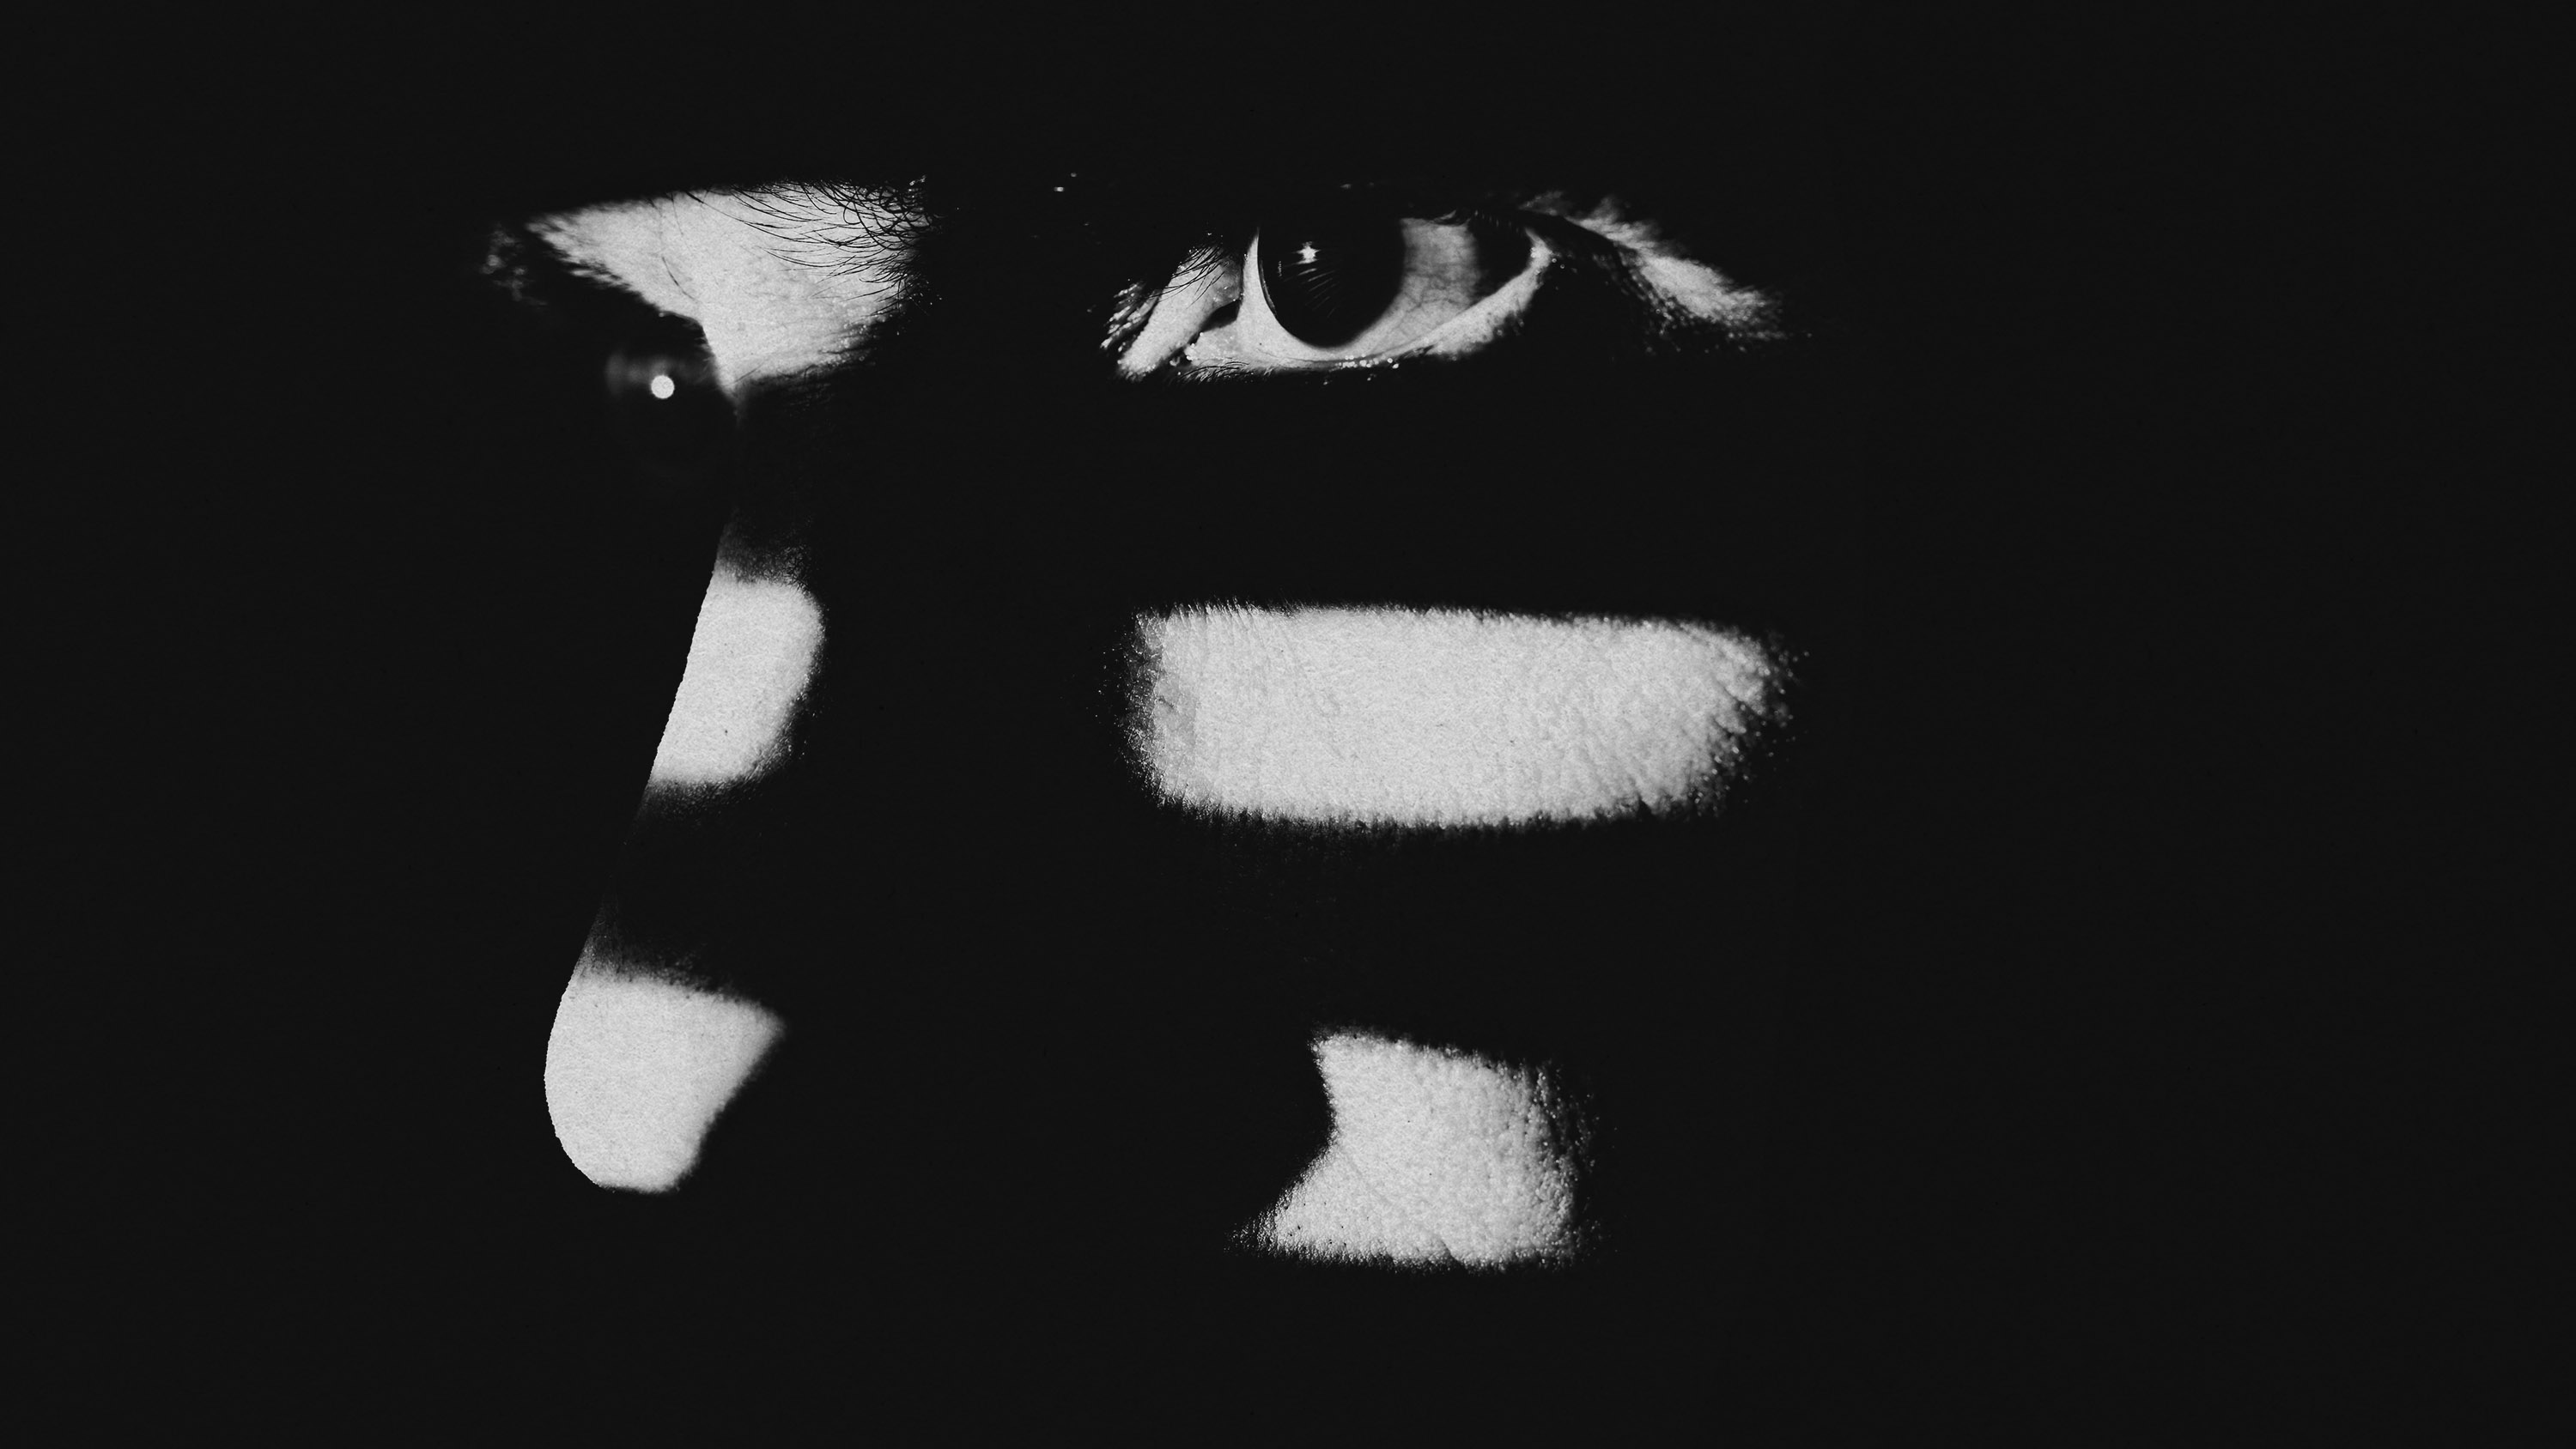 a man's face partially obscured by shadows